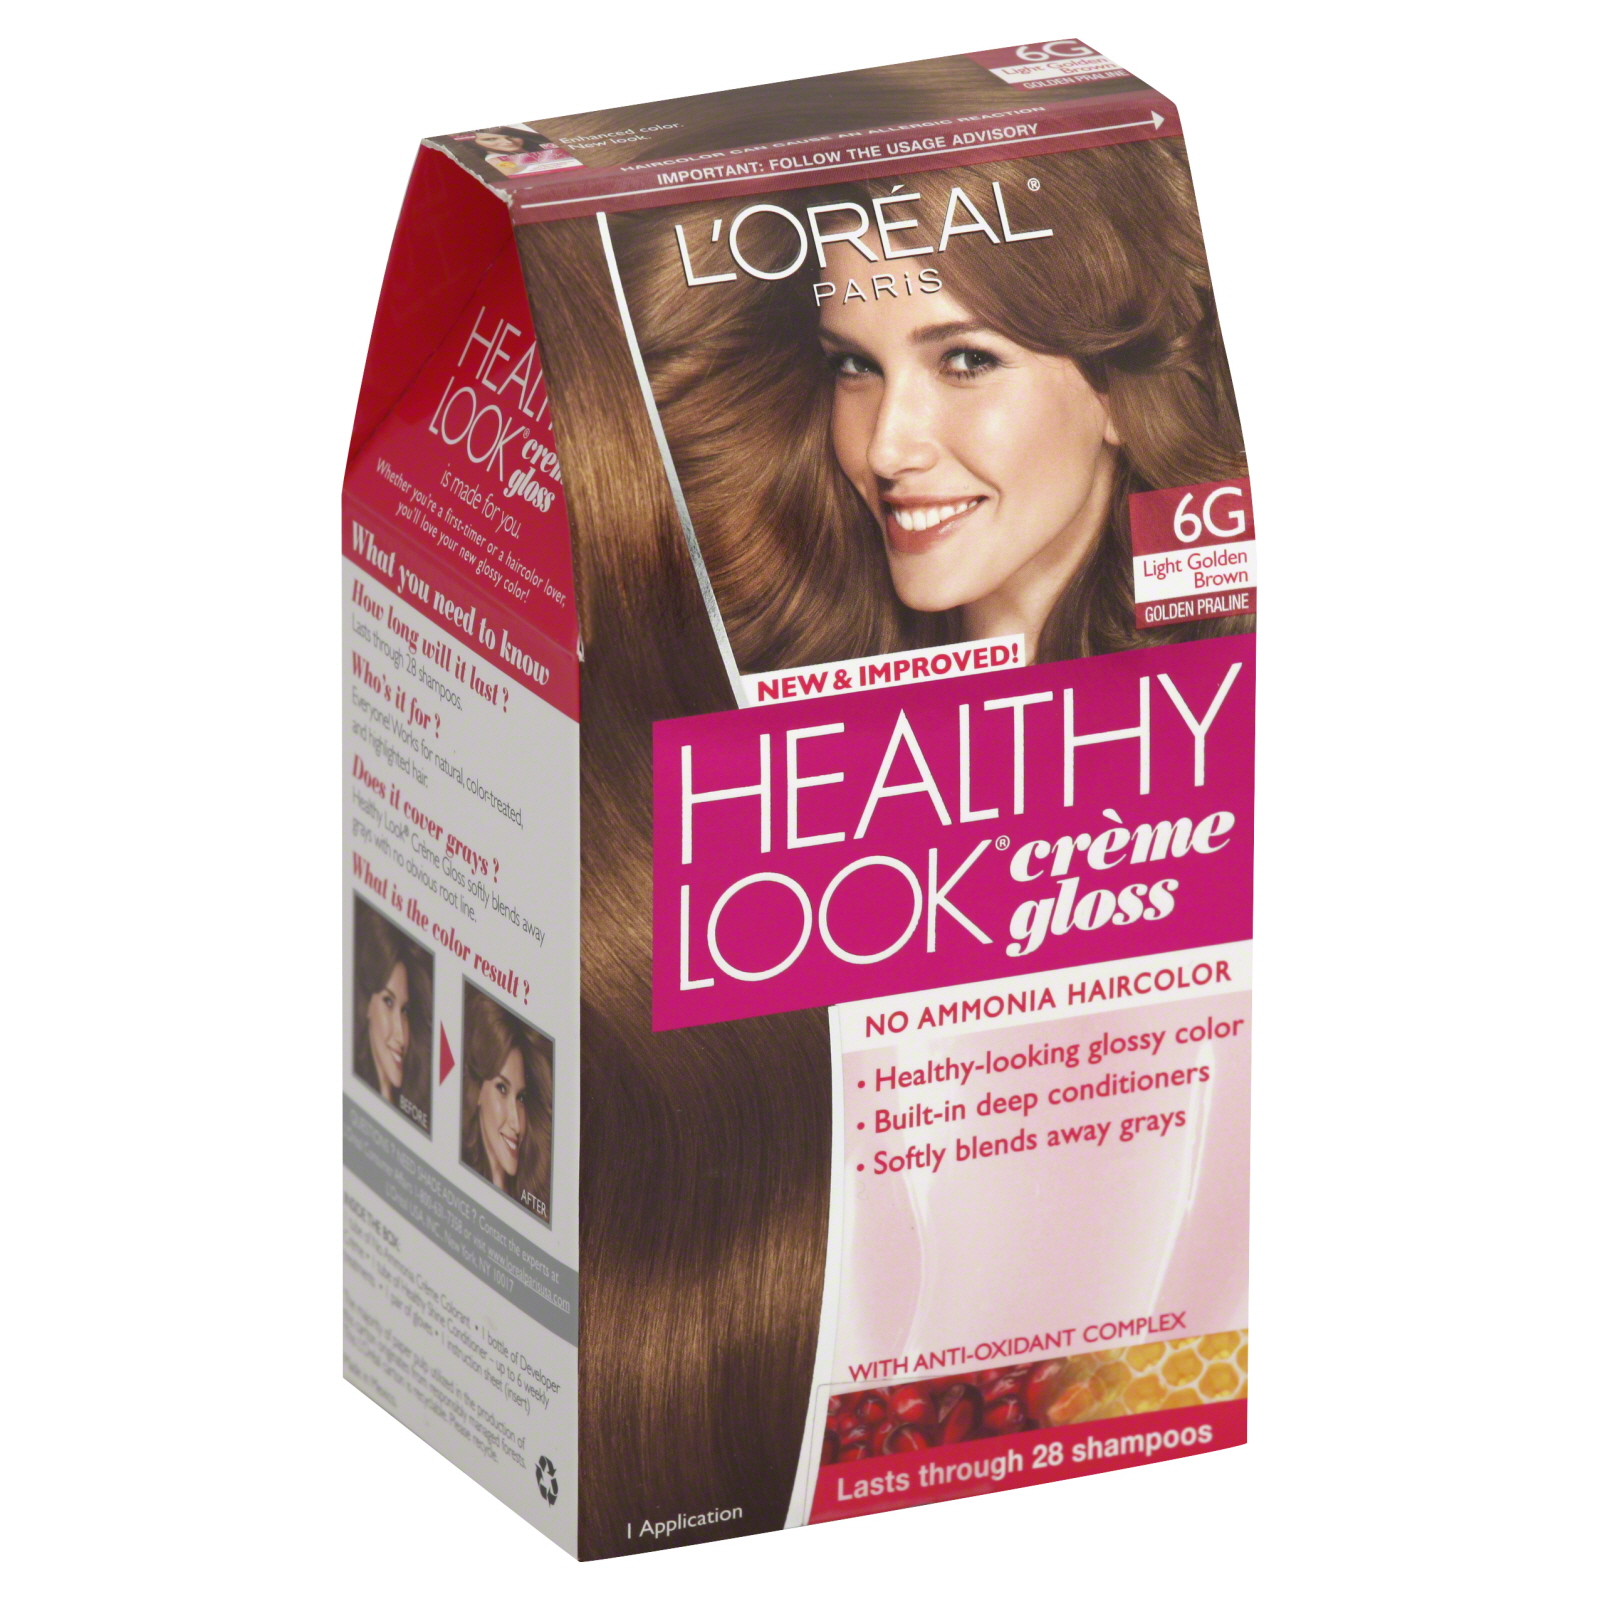 L'Oreal Healthy Look Hair Dye, Creme Gloss Color, Light Golden Brown 6G, 1 application